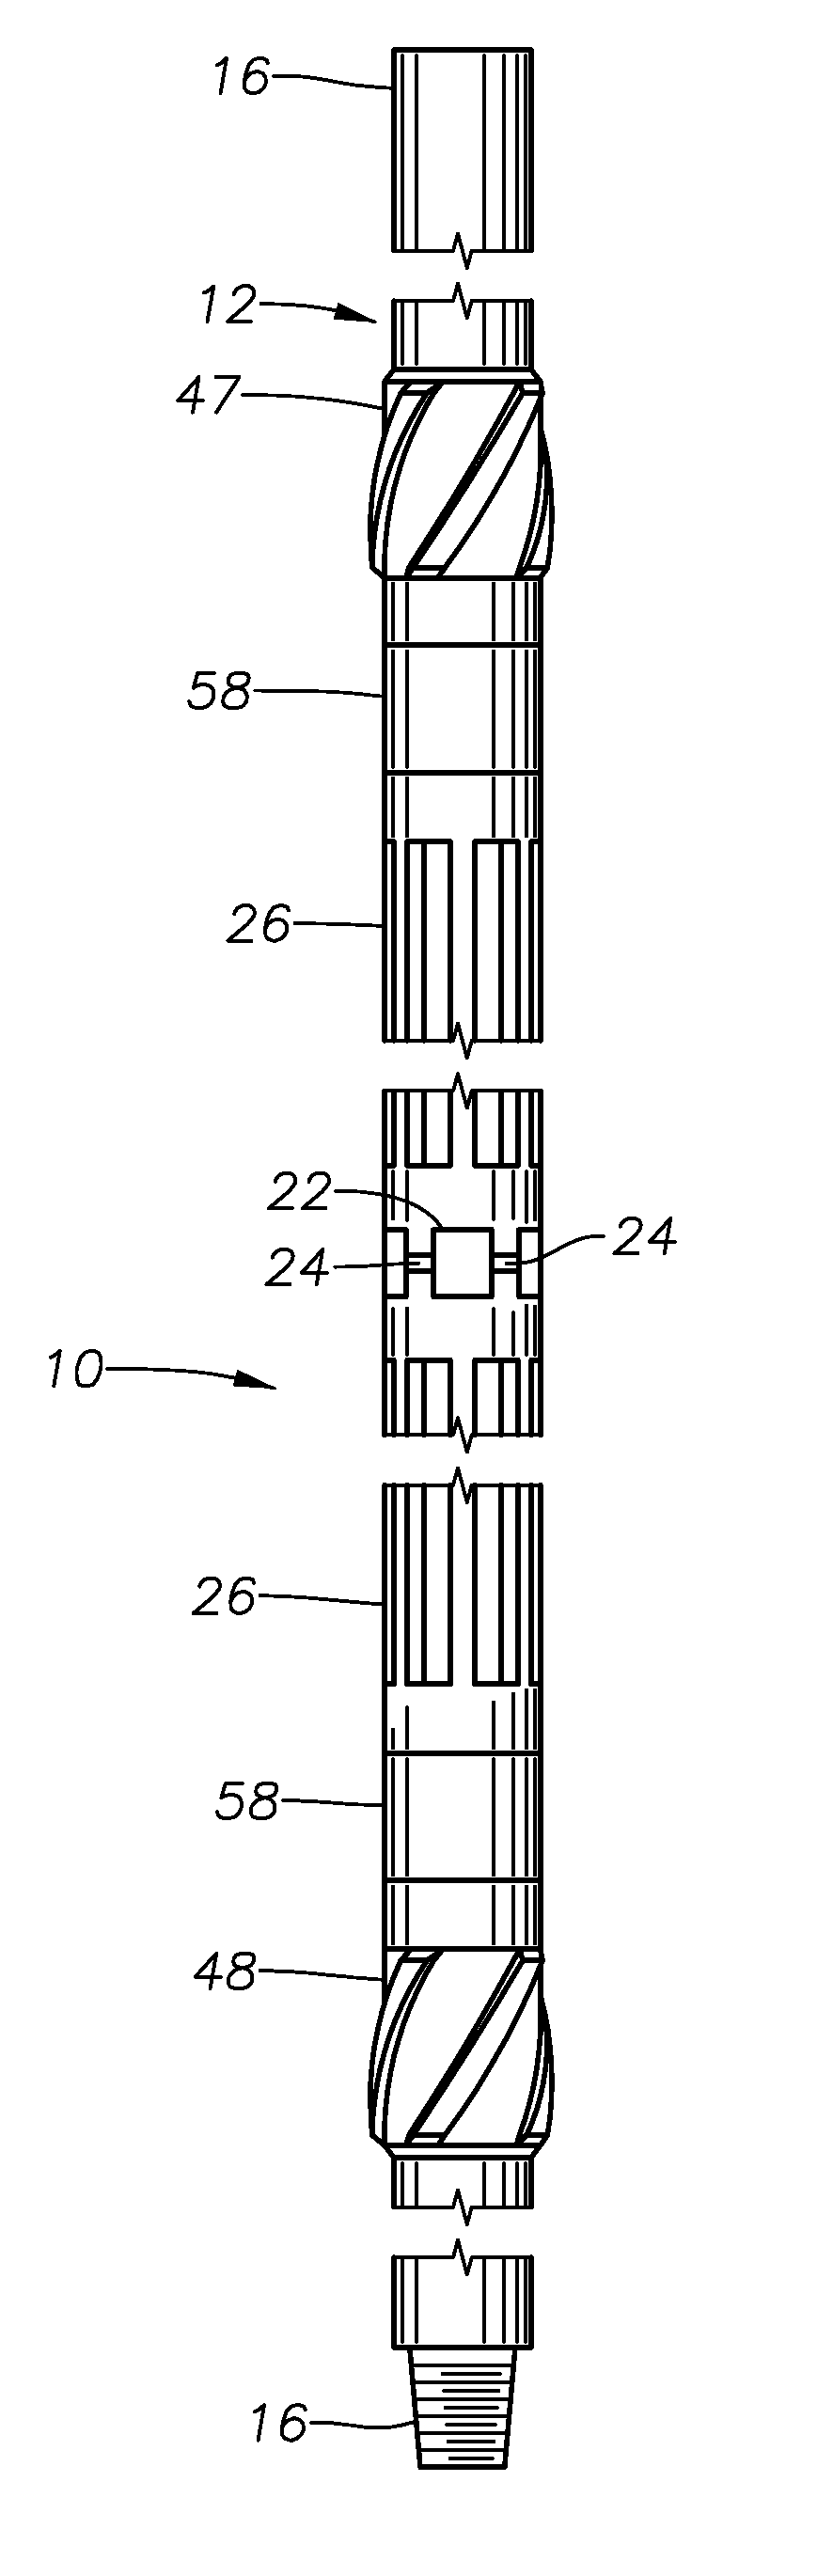 Downhole Magnetic Retrieval Devices with Fixed Magnetic Arrays